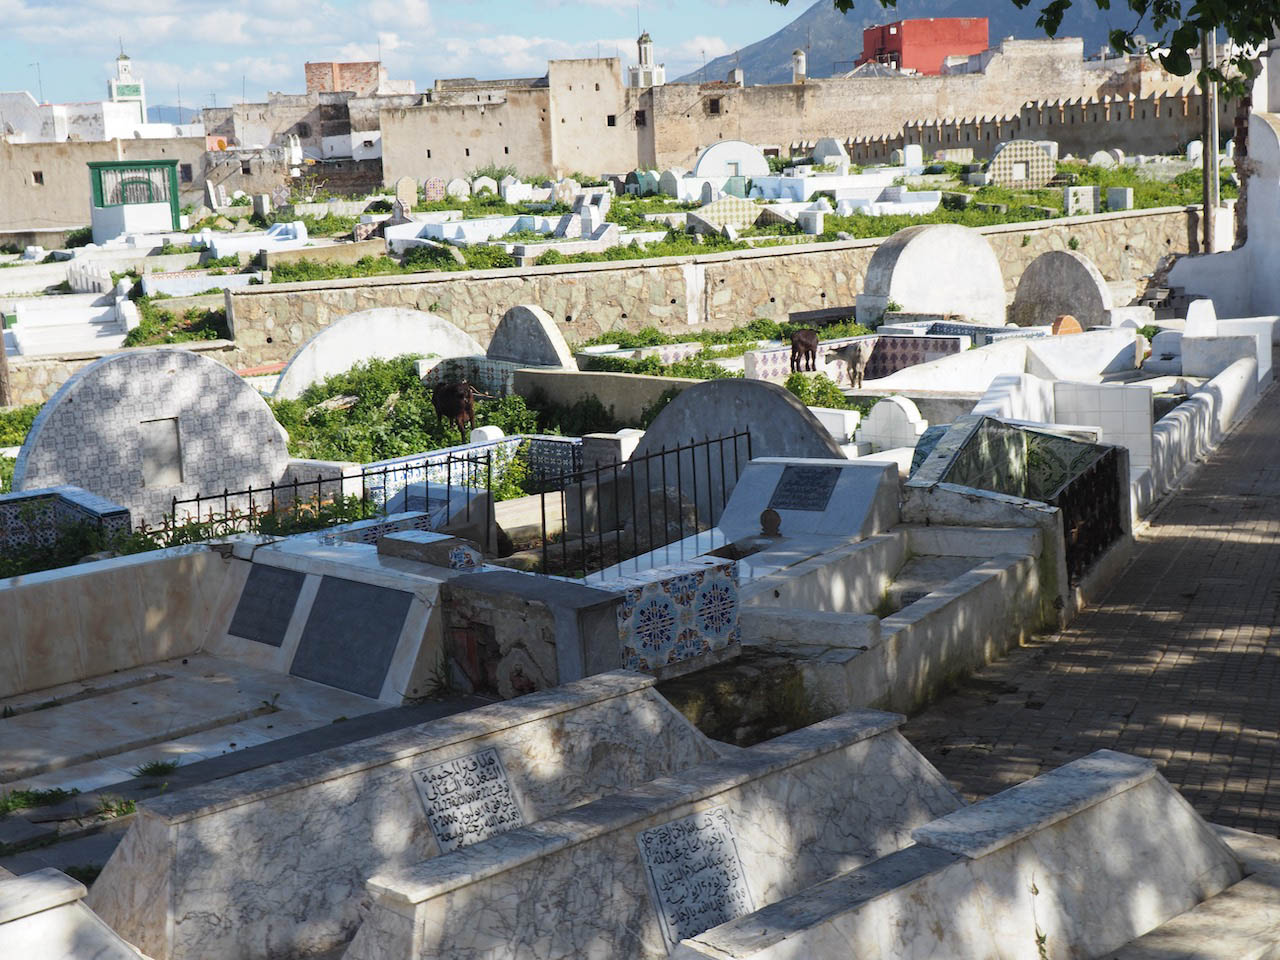 <p>Close view of the tombs with the city and minarets in the background</p>